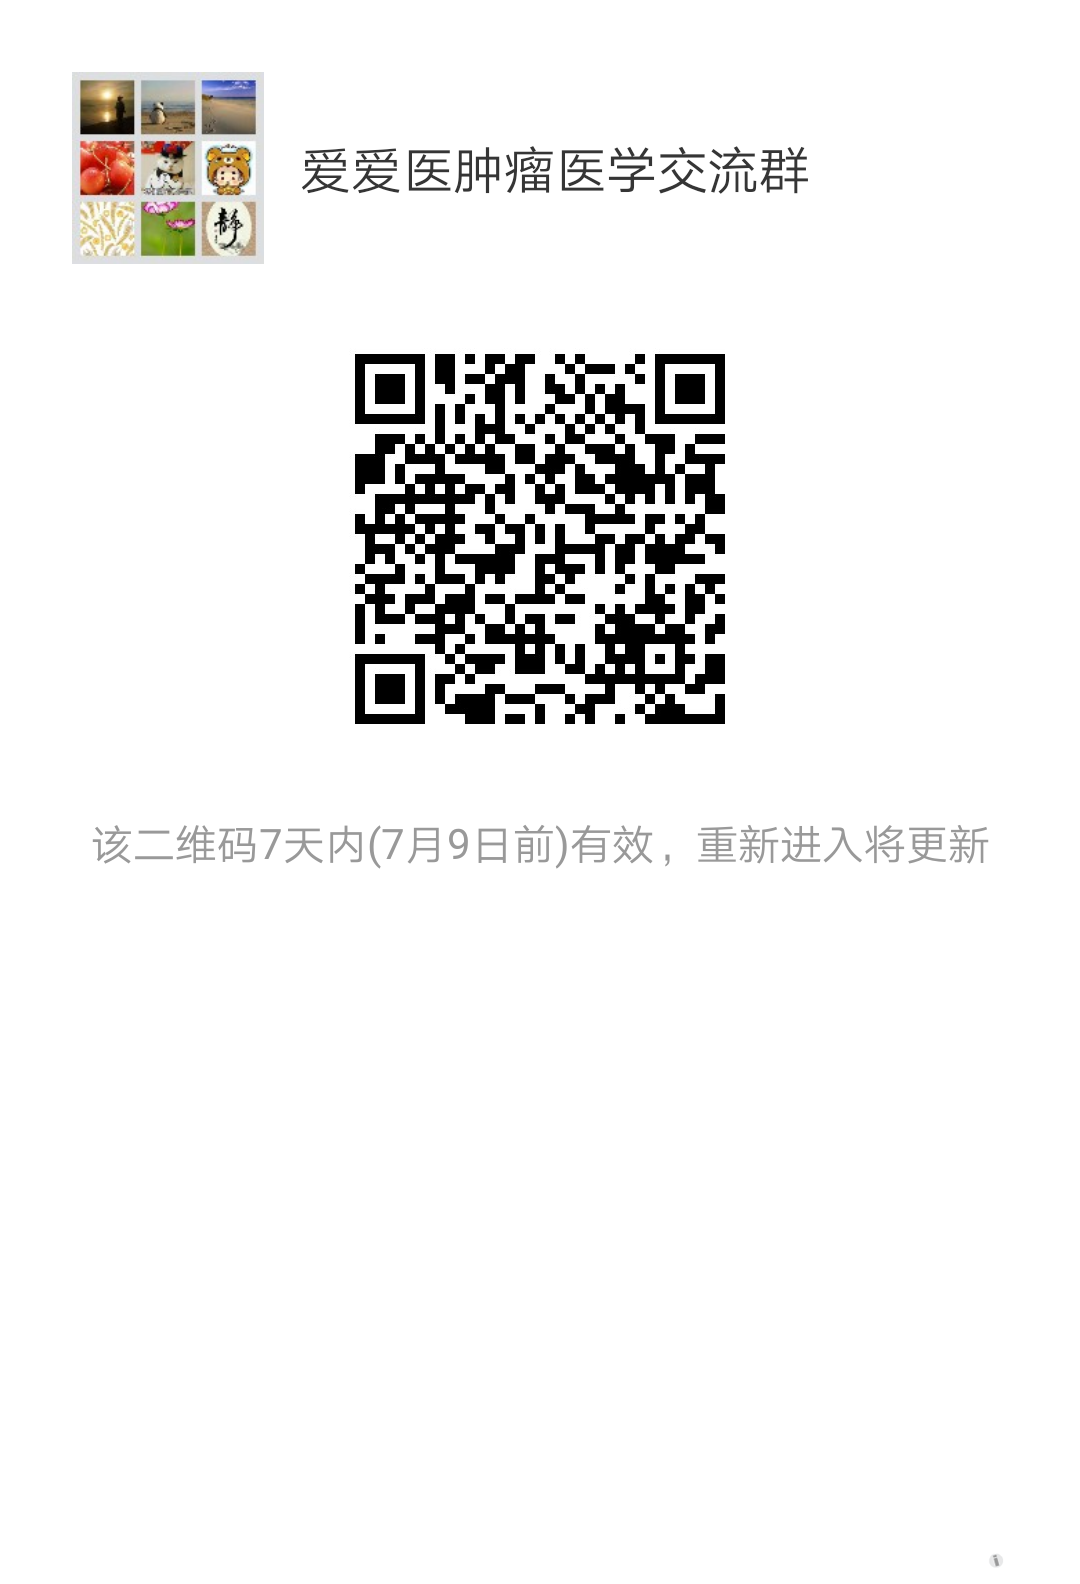 mmqrcode1498986743316.png